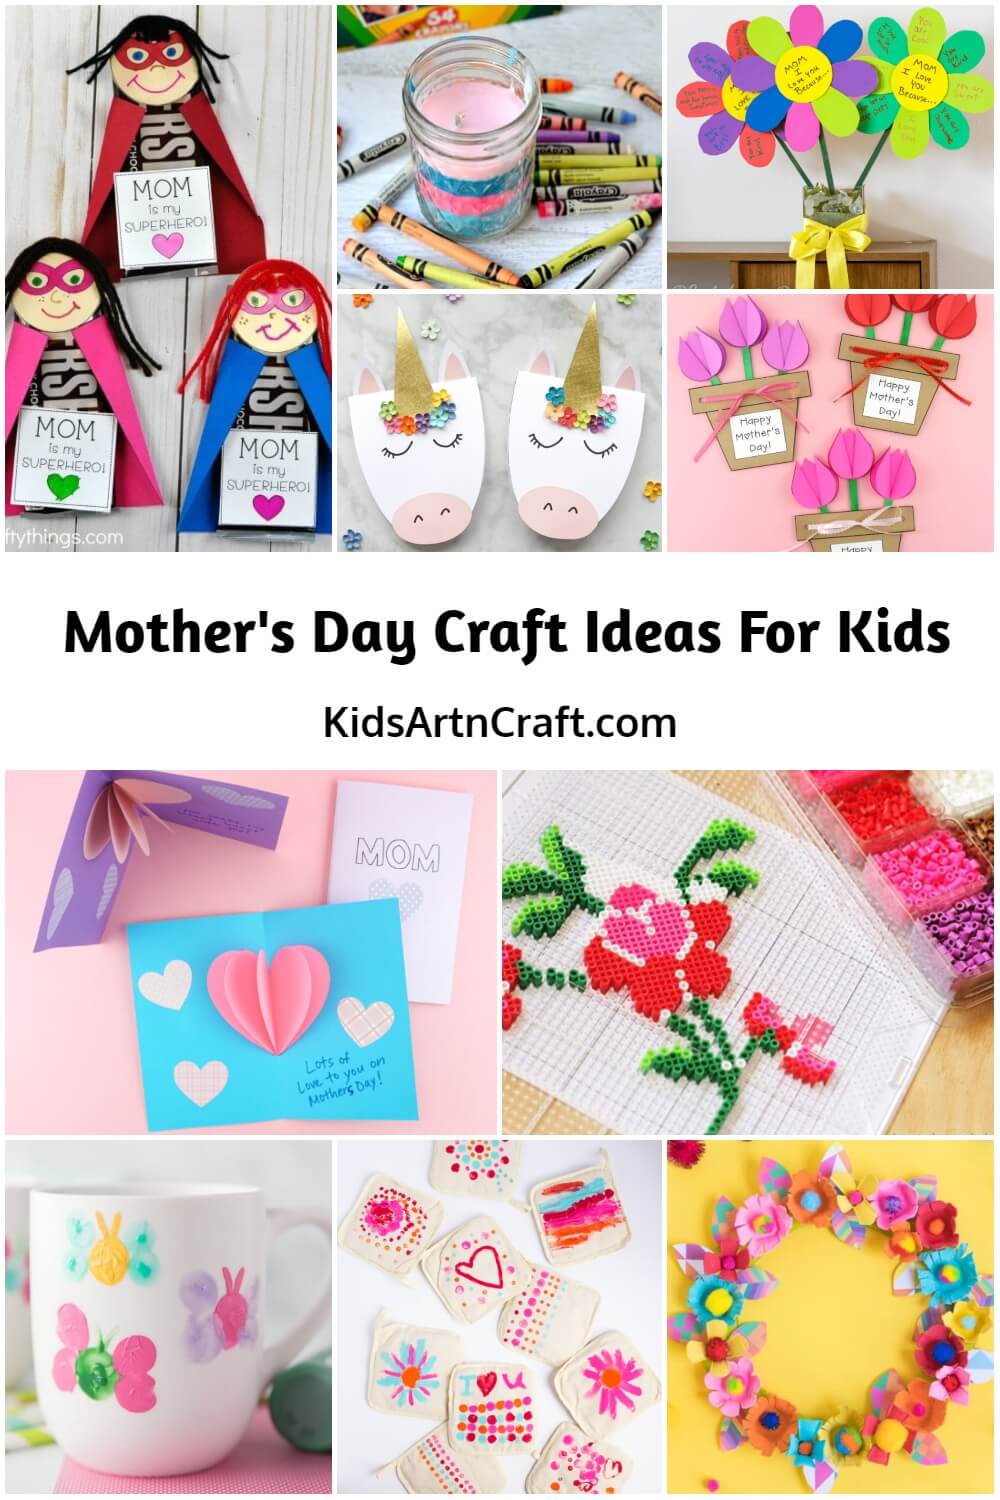 Mother's Day Craft Ideas For Kids